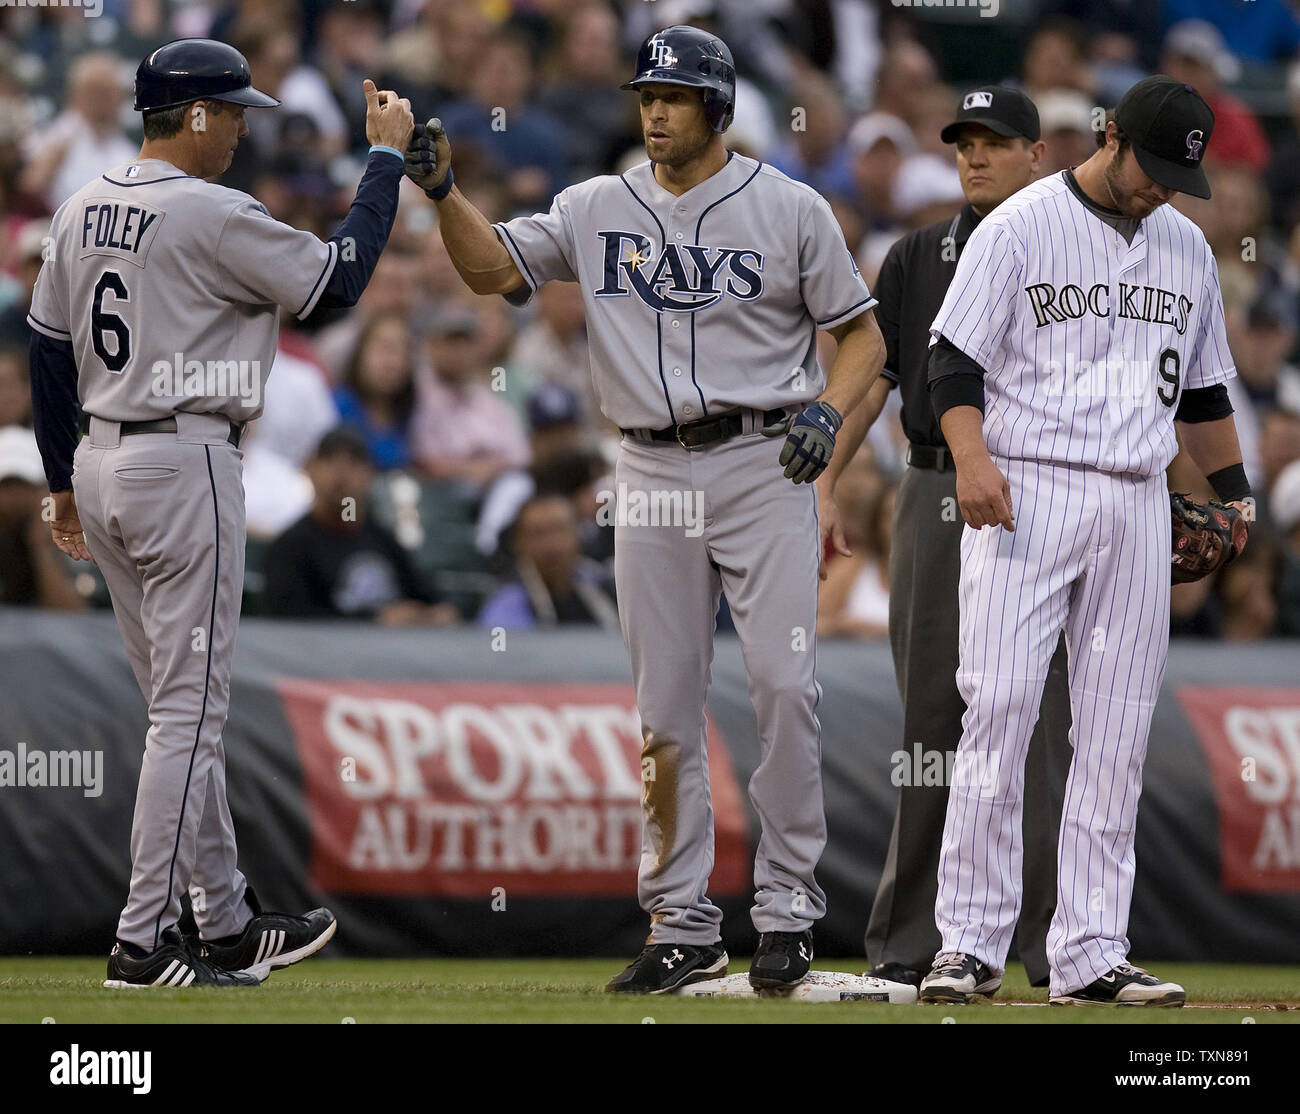 Tampa Bay Rays right fielder Gabe Kapler (C) receives congratulations from third base coach Tom Foley after a two-run triple against the Colorado Rockies in the second inning during an interleague game at Coors Field  in Denver on June 16. 2009.  Rockies third baseman Ian Stewart walks away from the celebrating duo.  Tampa Bay snapped Colorado's eleven game win streak with a 12-4 win.     (UPI Photo/Gary C. Caskey) Stock Photo